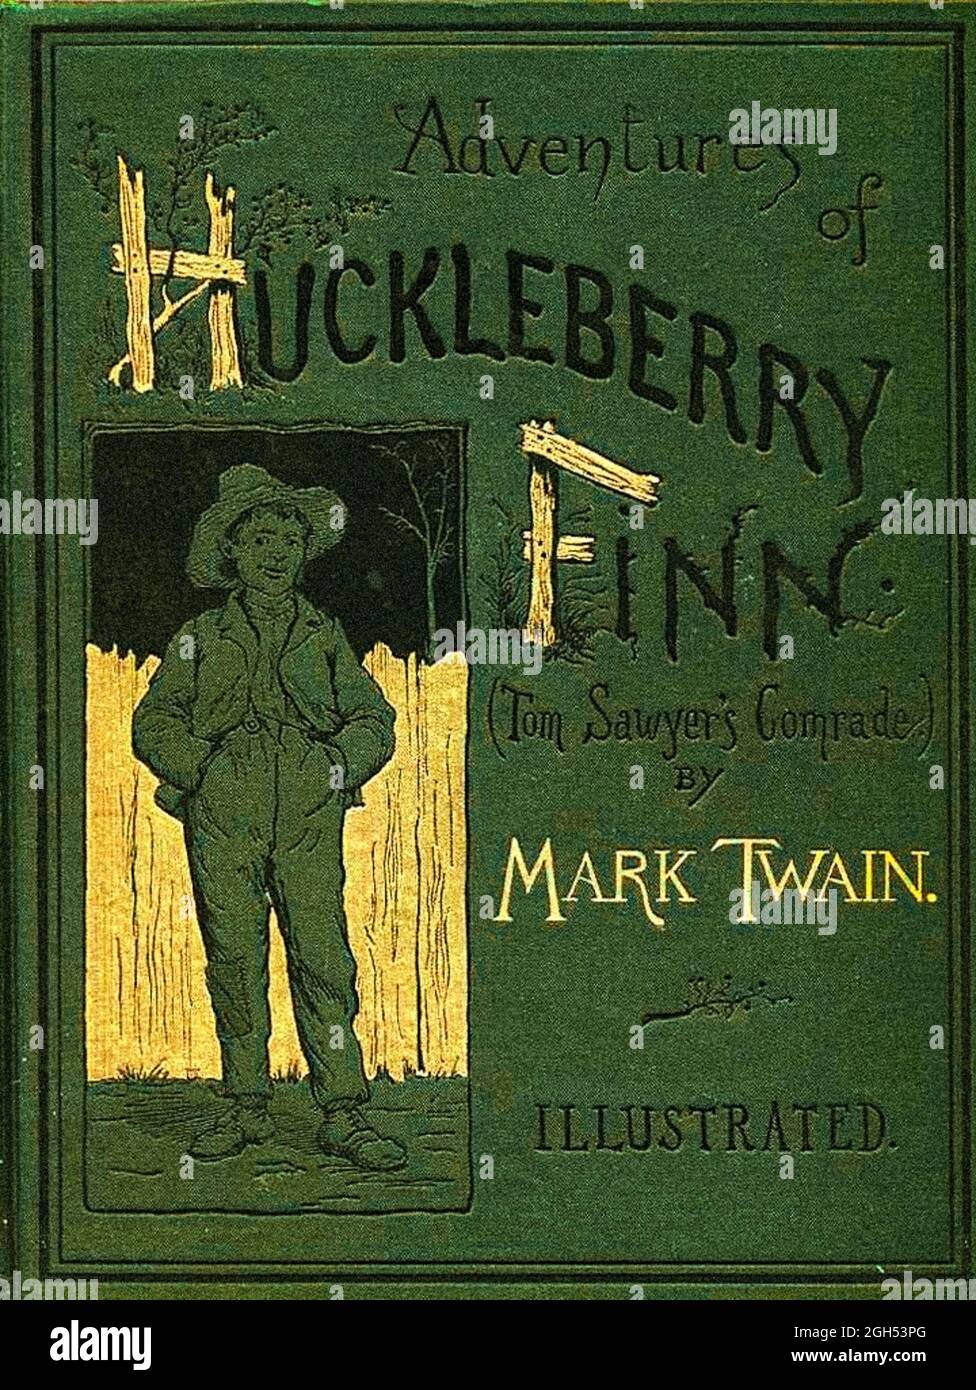 Cover of the book «Adventures of Huckleberry Finn» by Mark Twain, 1884 Stock Photo